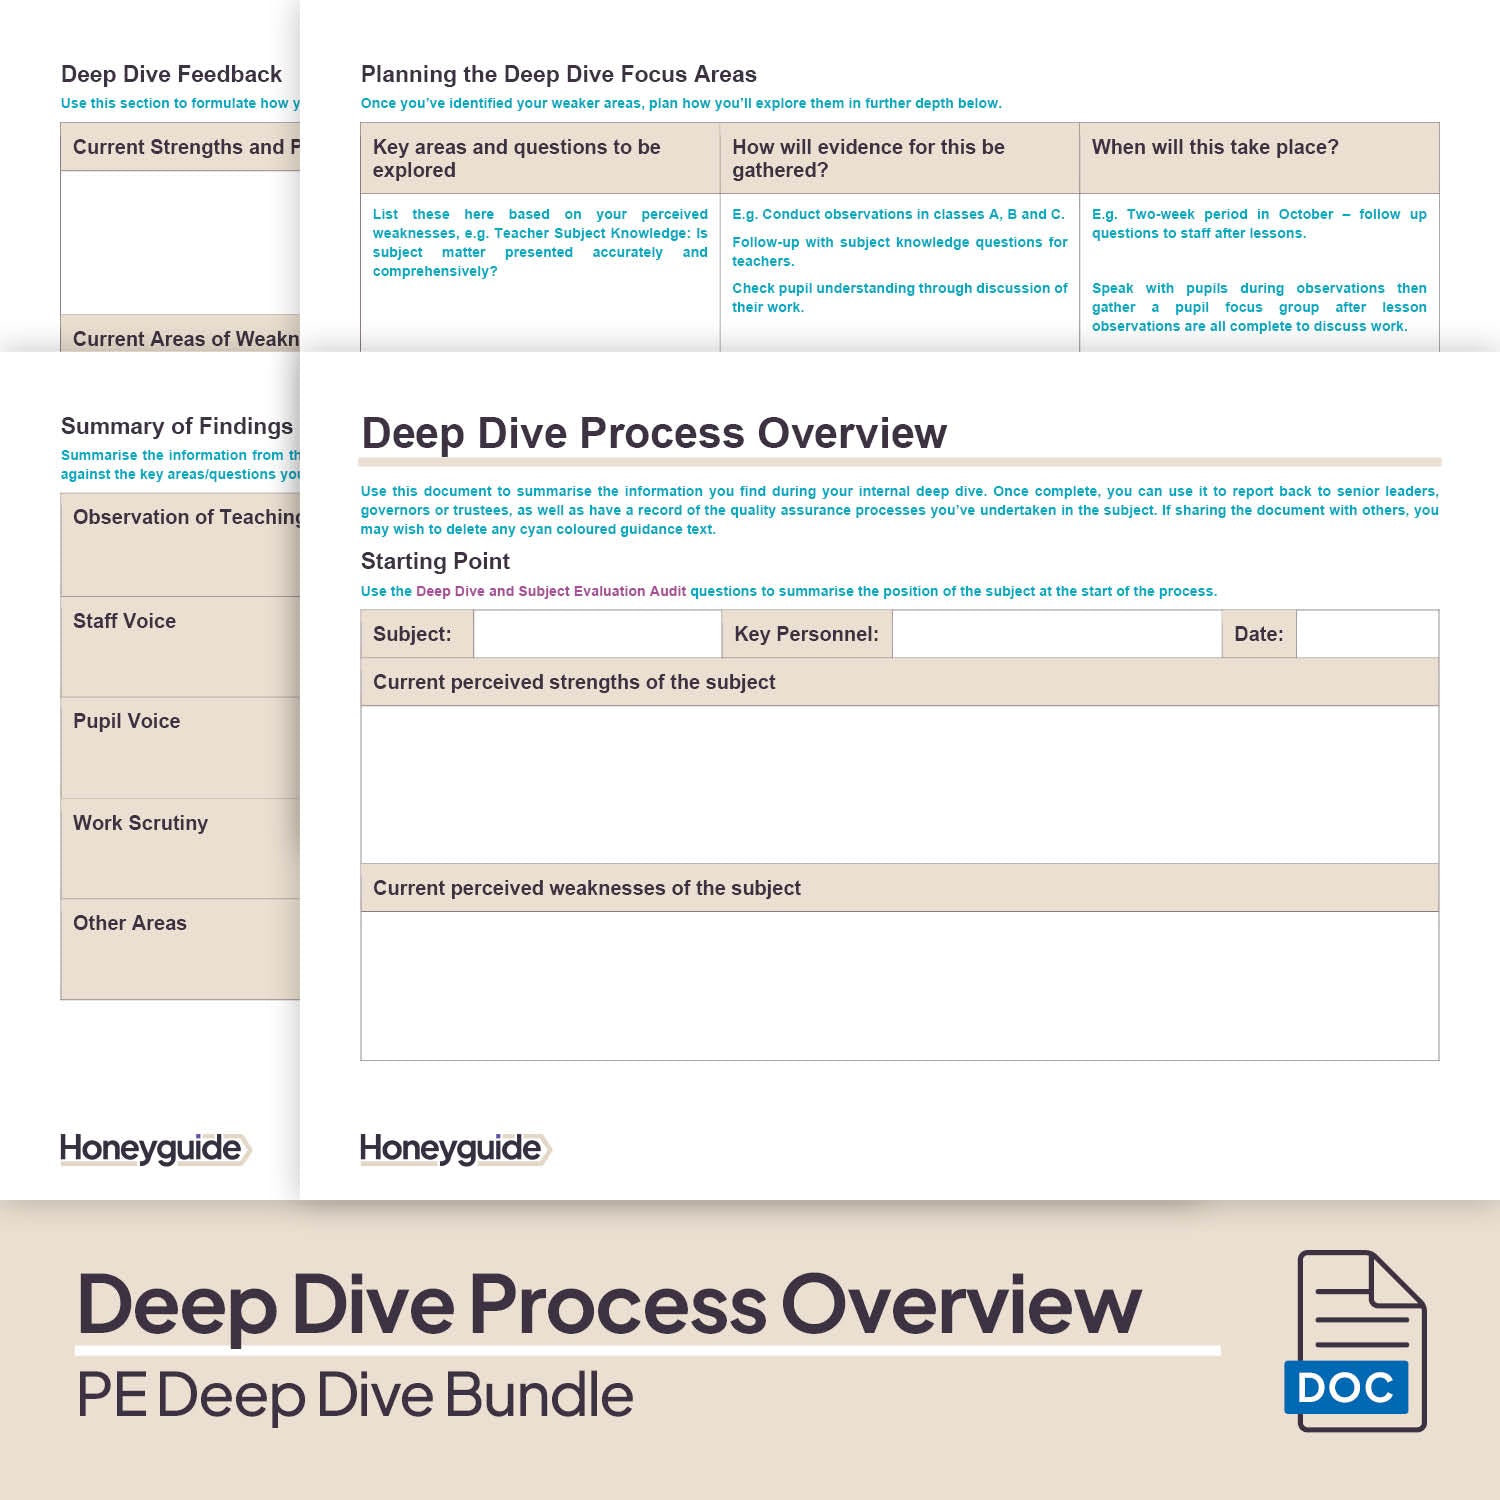 PE Deep Dive and Subject Knowledge Bundle by Honeyguide School Leader Support